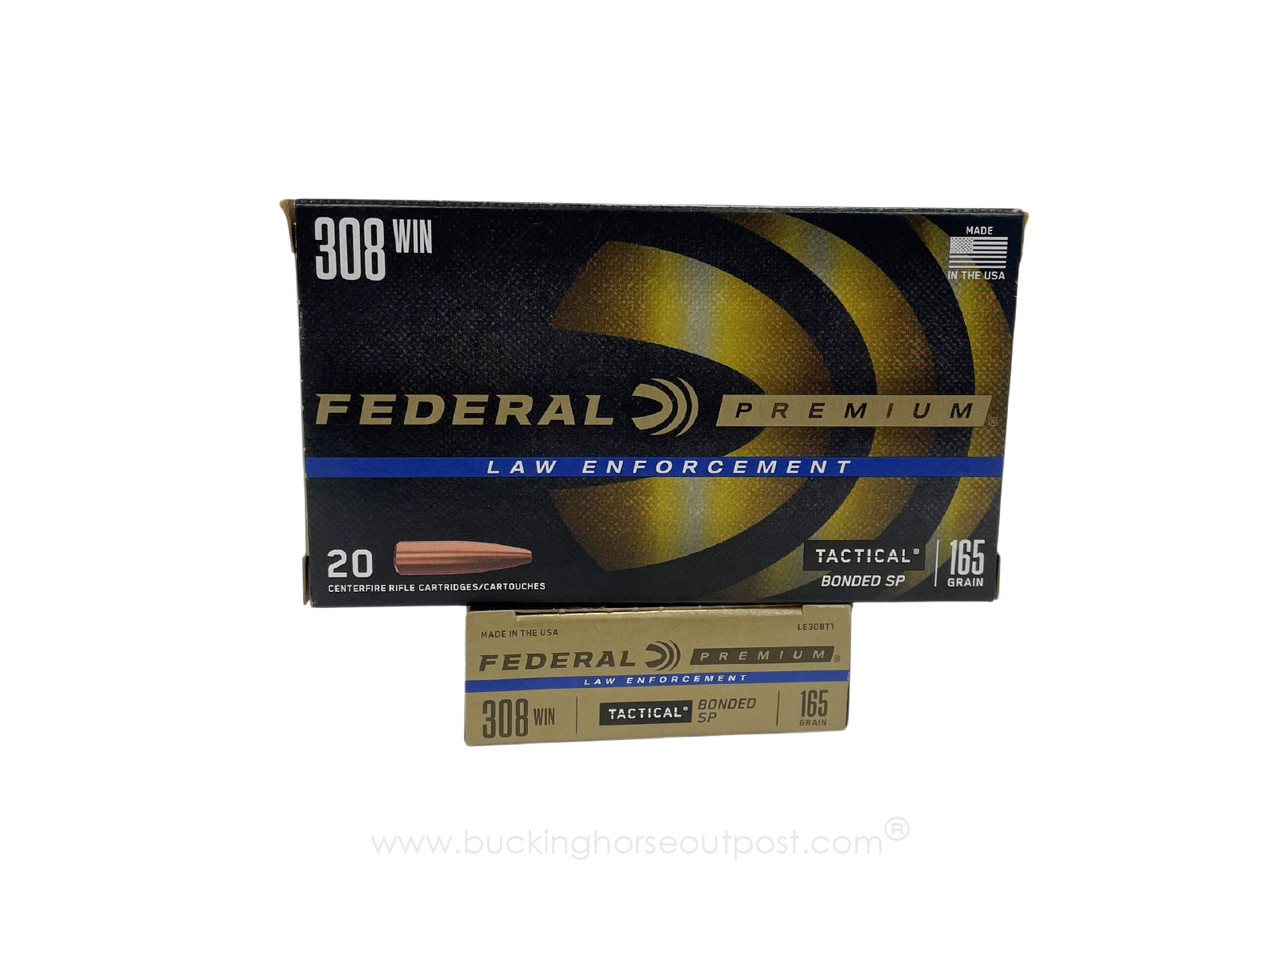 Federal Premium LE Tactical Bonded .308 Winchester 165 Grain Bonded Soft-Point 20rds Per Box (LE308T1) - Police Trade In - FREE SHIPPING ON ORDERS OVER $175